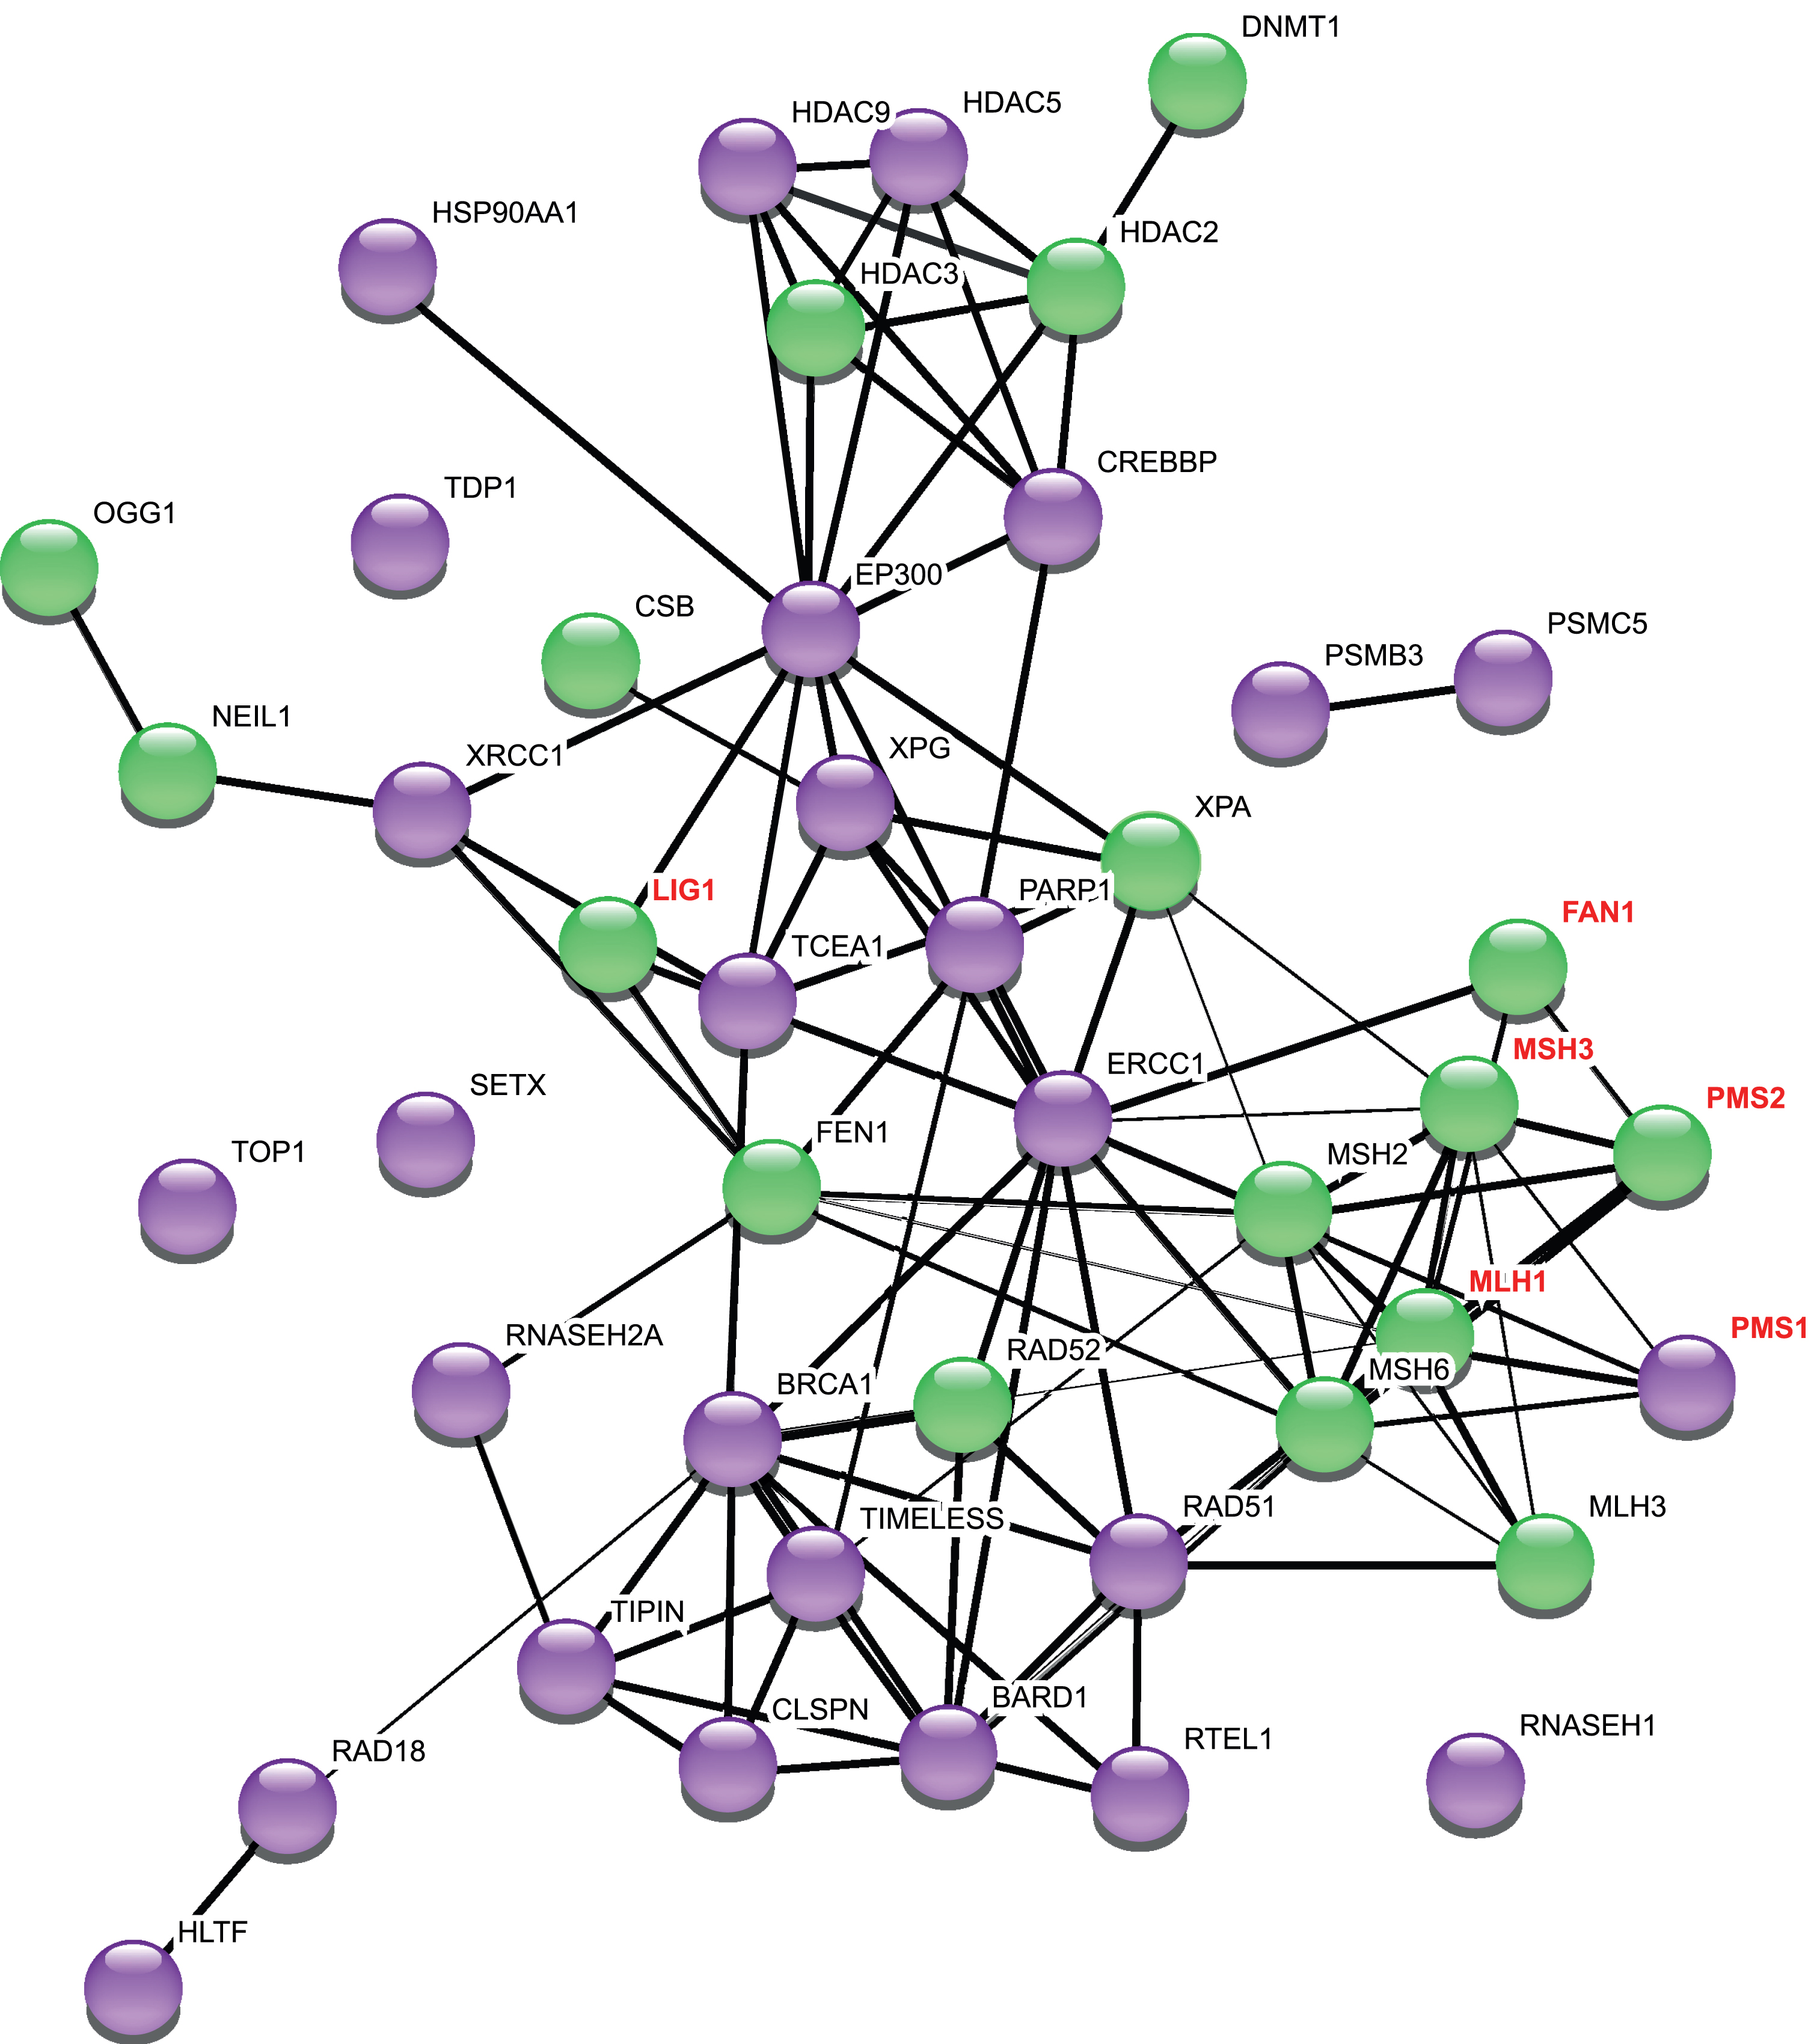 Network of repeat instability modifiers. This network was generated using StringDB v.11. The thickness of the edges refers to the confidence score (CS). 1 pt edges represent a CS of 0.7, 2 pt edges have a CS of 0.8, and 3 pt edges have a CS of 0.9 or greater. The String output categorizes interactions as “binding” (direct or indirect), “catalysis” and “reaction”: for clarity we have not included this in the Figure, but refer the reader to the StringDB v.11 for this information [126]. Purple nodes are genetic modifiers in at least one mammalian system for studying repeat instability. Green nodes are modifiers of repeat instability in murine models of CAG/CTG diseases. Names of genes additionally identified as modifiers of HD age at onset or progression [48–50, 52] are highlighted in red font. PMS1 promotes repeat expansion in a mouse cell model with an expanded CGG/CCG repeat [127].